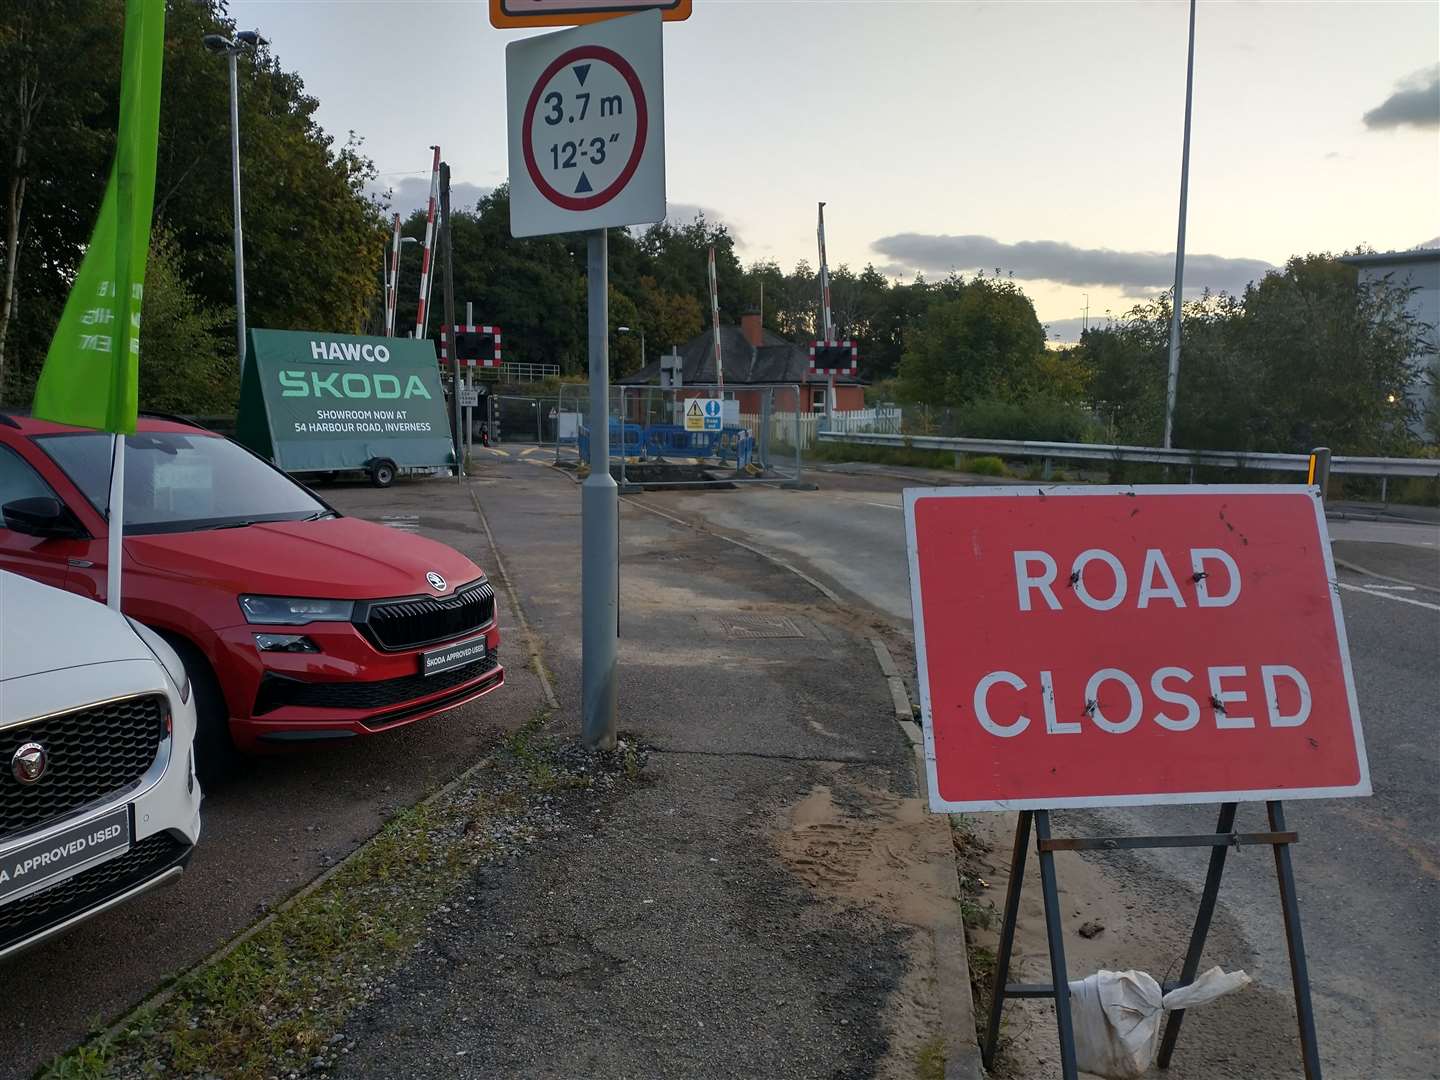 'Road closed' signs remained in place shortly before 7.30am on Monday.